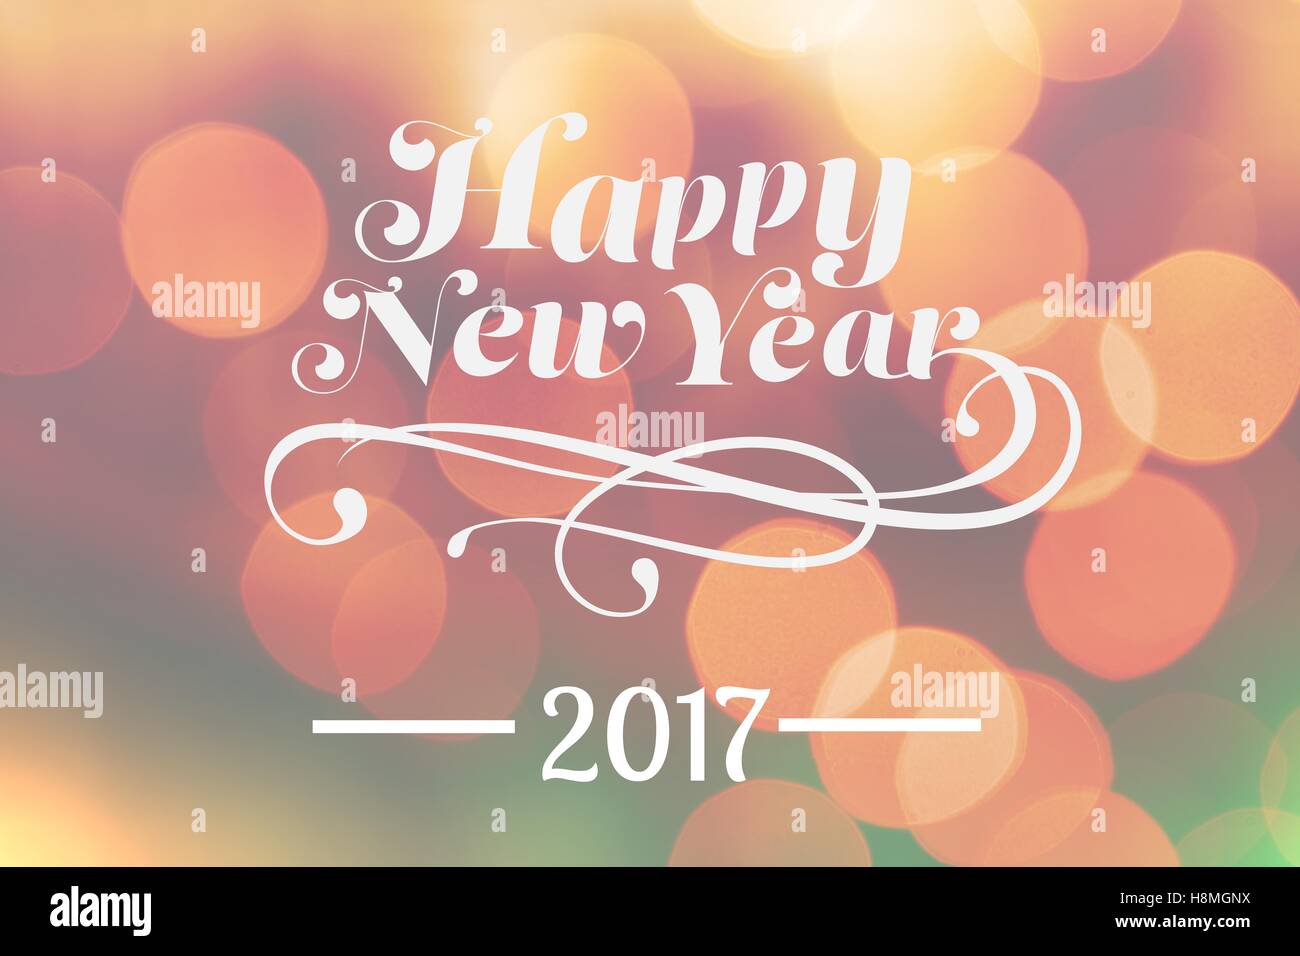 New Year Message on Blurry Background Design Stock Photo